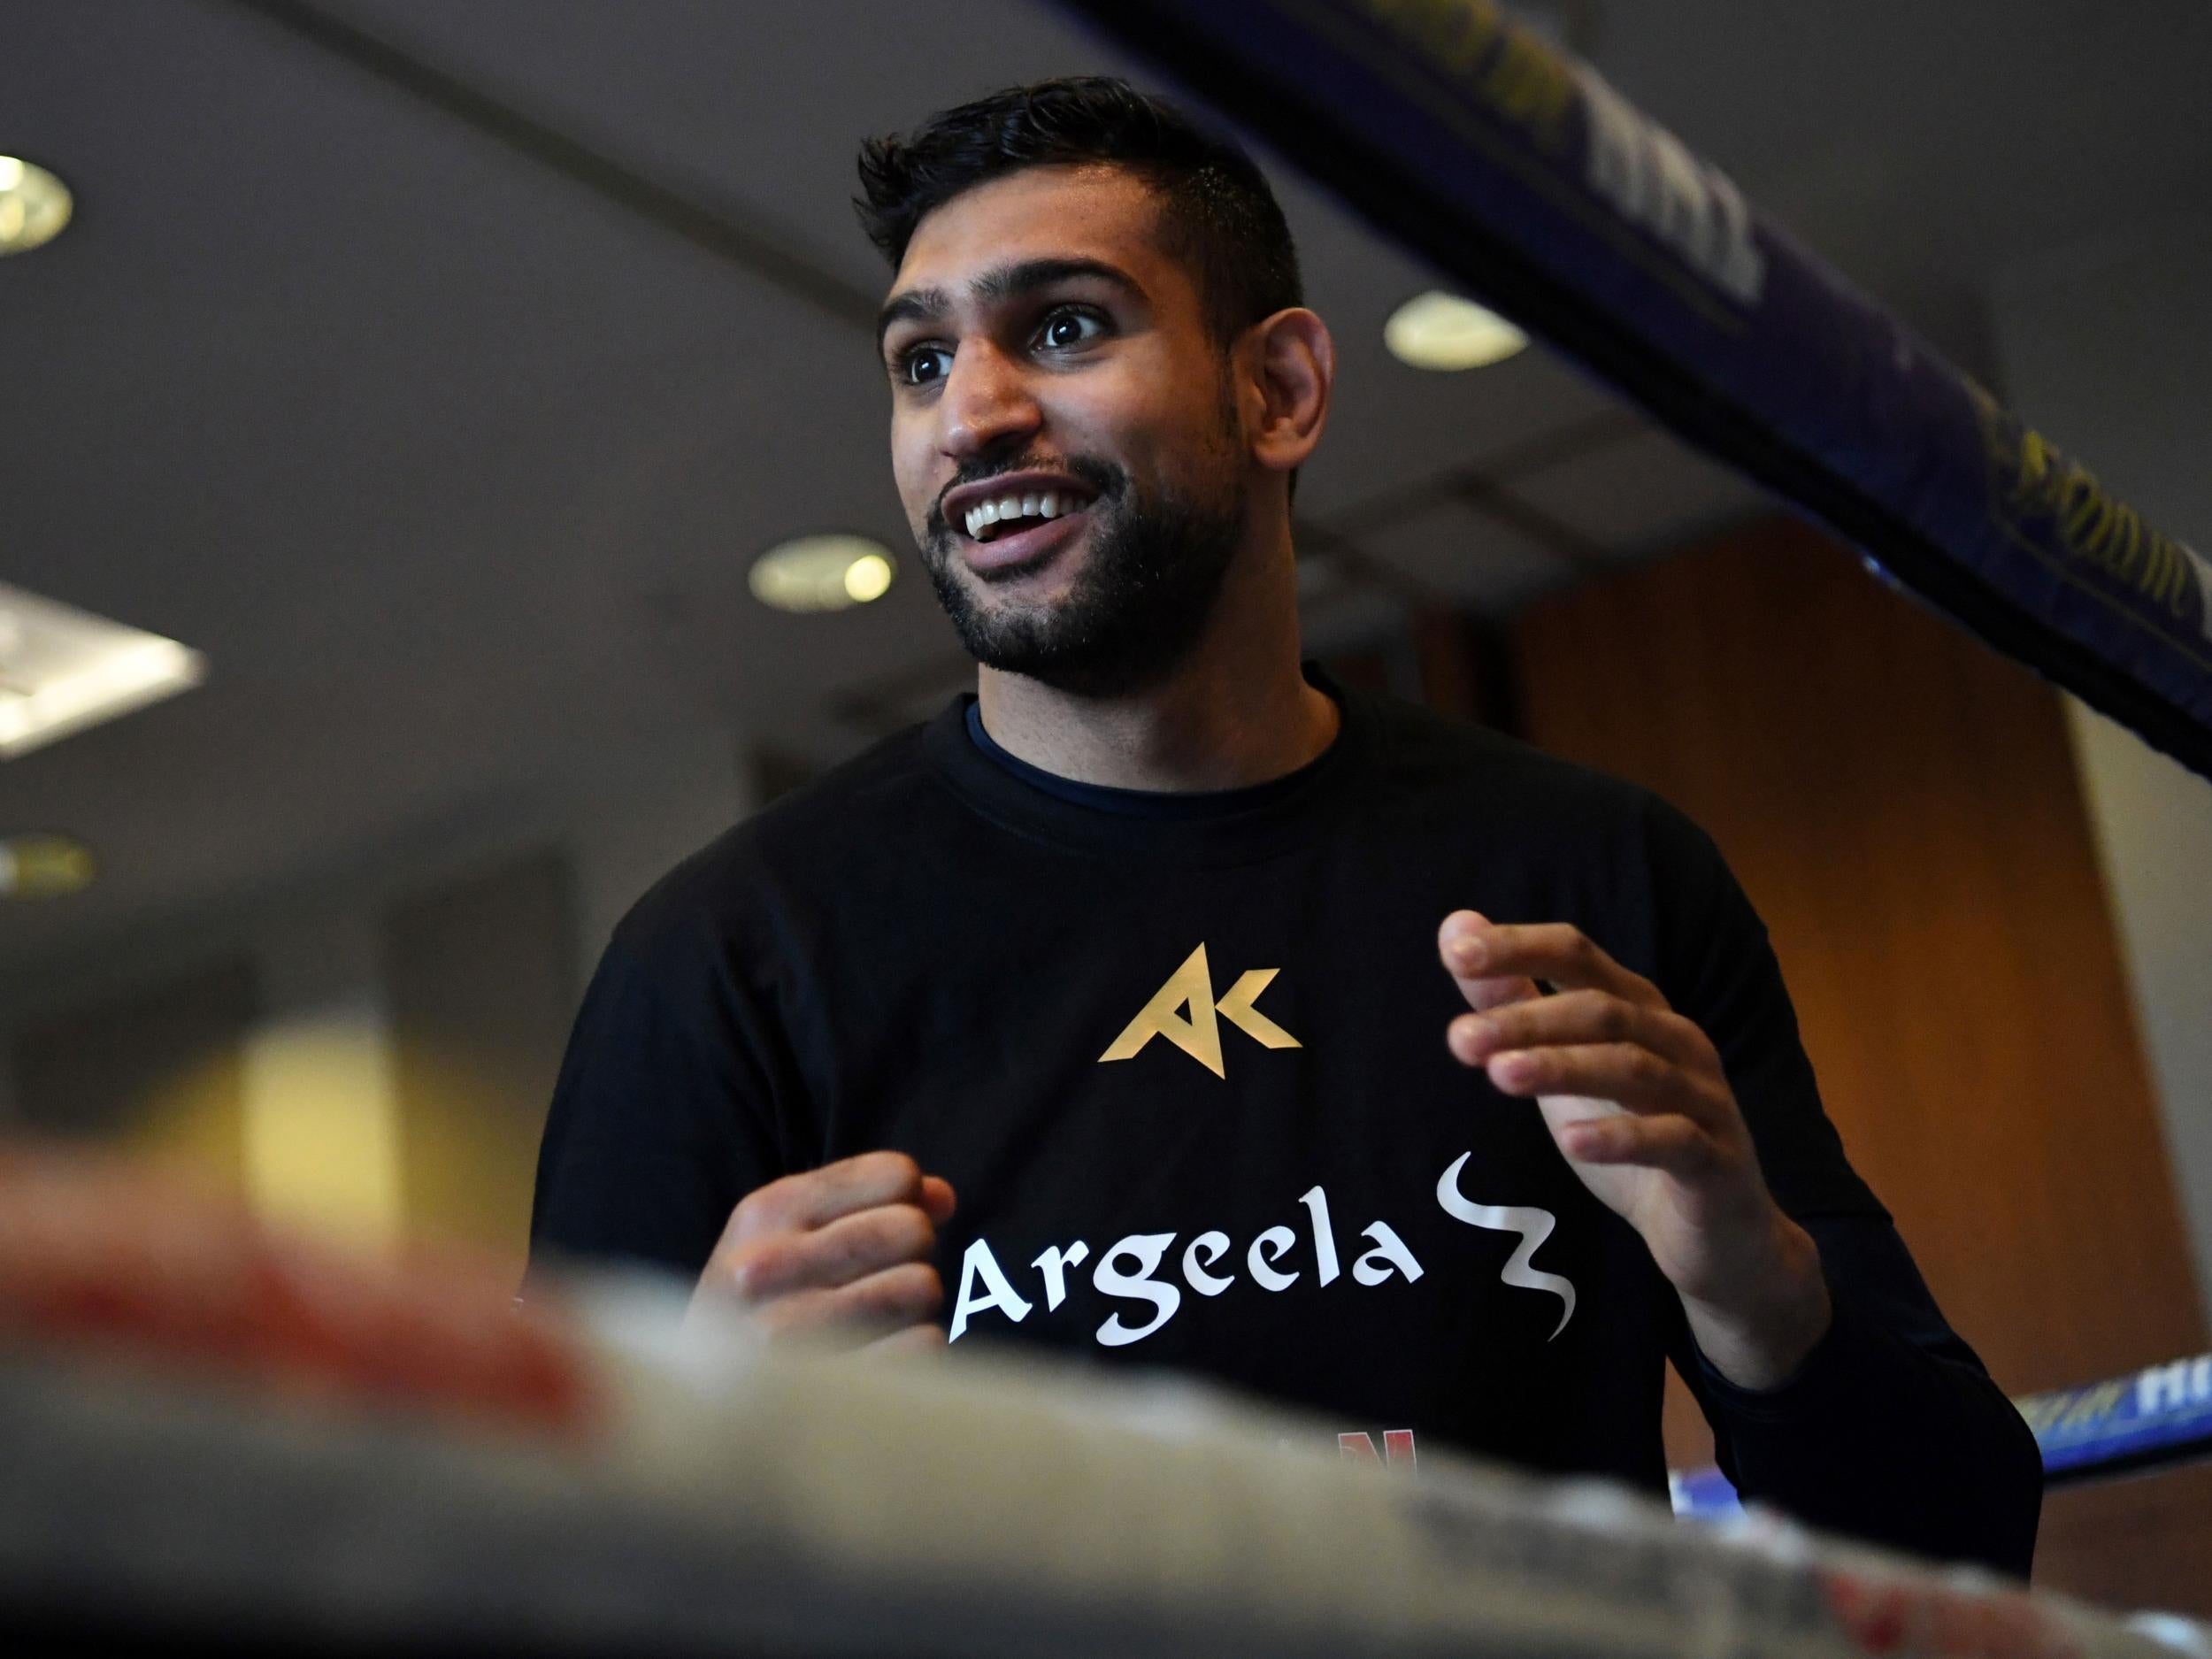 Khan returns to the ring in Liverpool this weekend